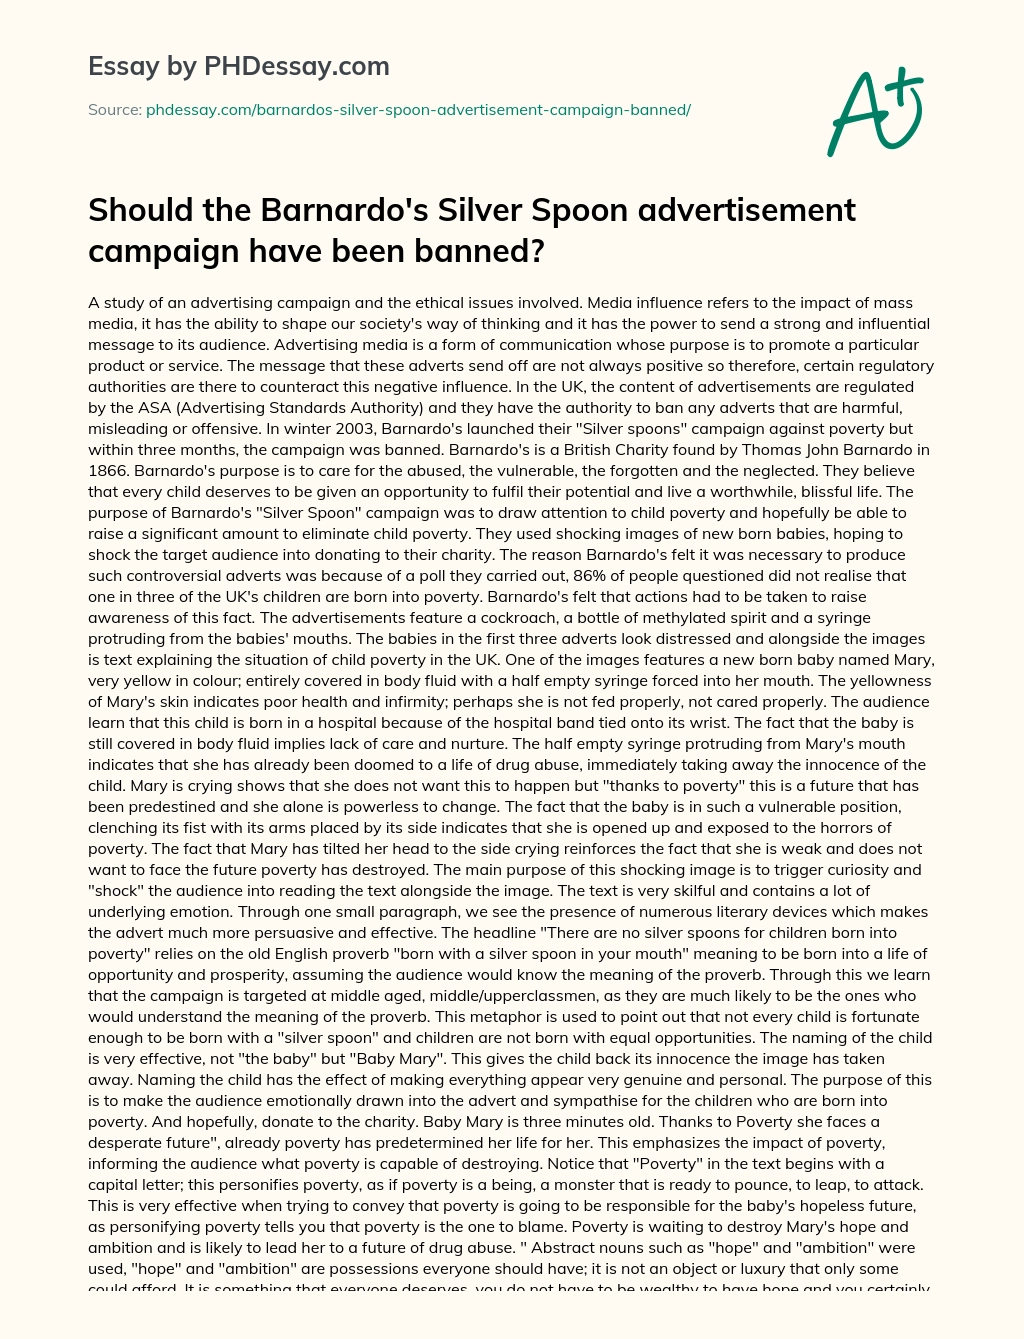 Should the Barnardo’s Silver Spoon advertisement campaign have been banned? essay